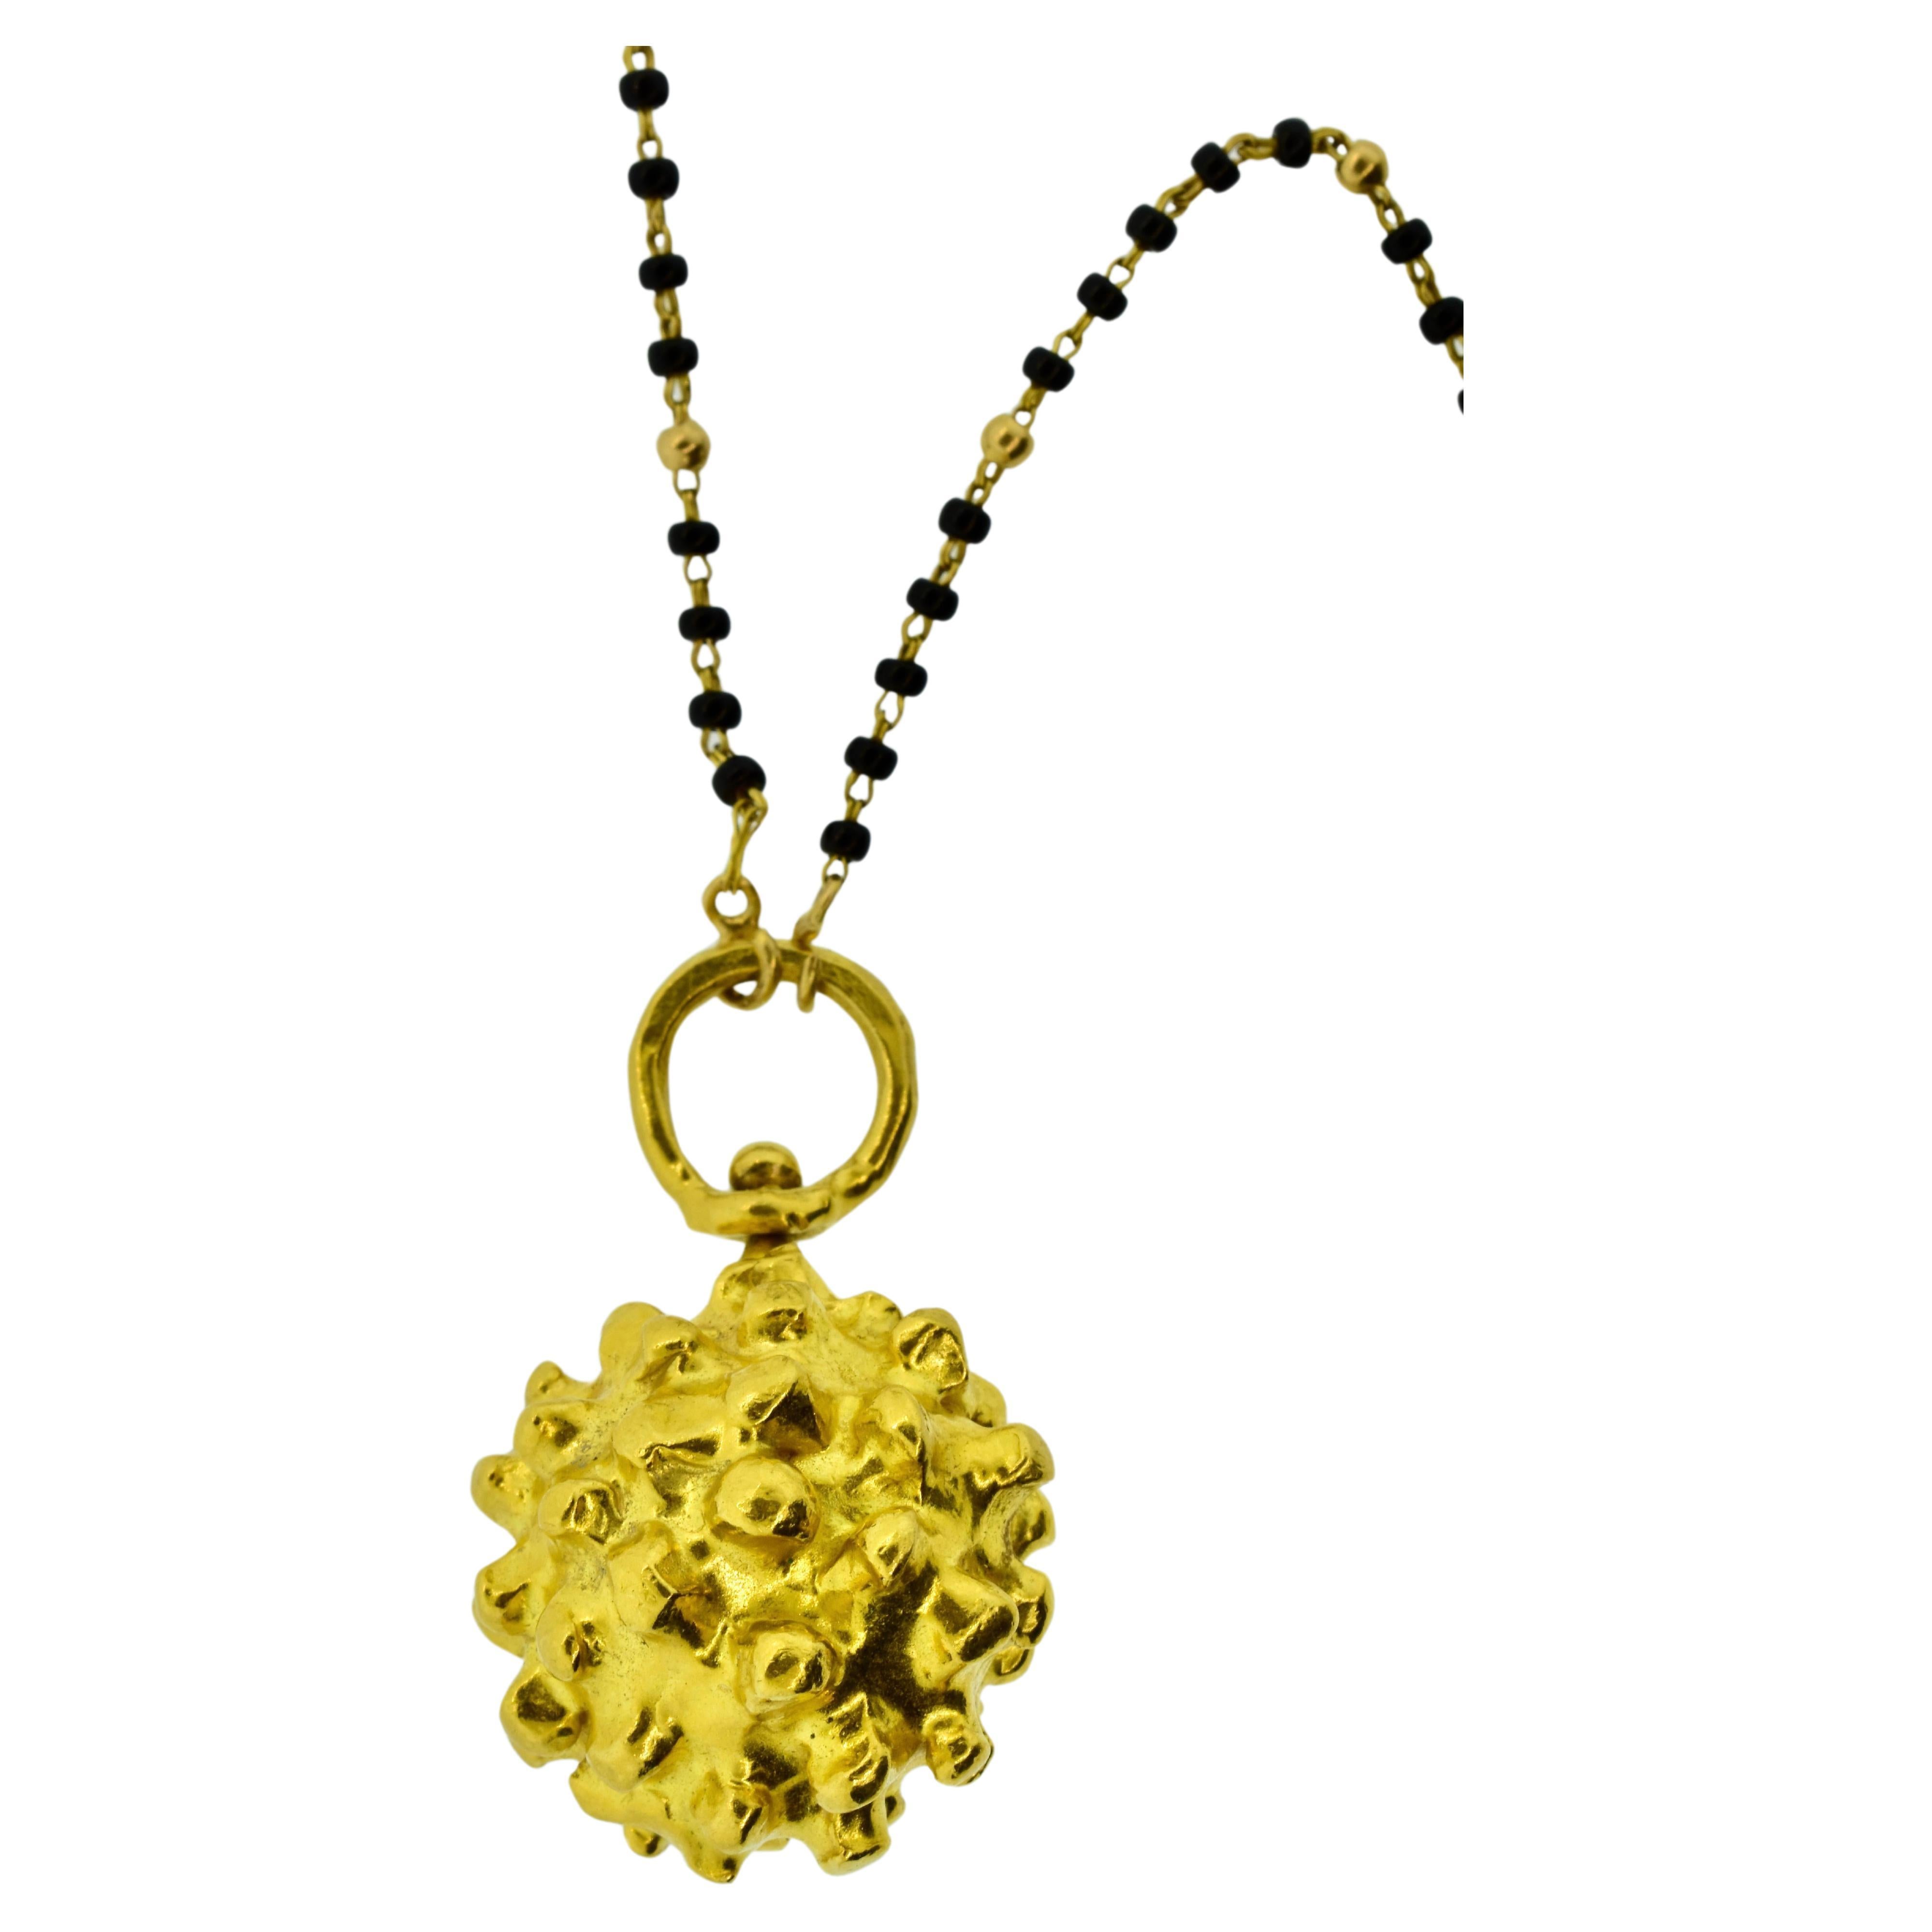 Jean Mahie Etruscan Large Ball Pendant in 22K Gold, French, c. 1990